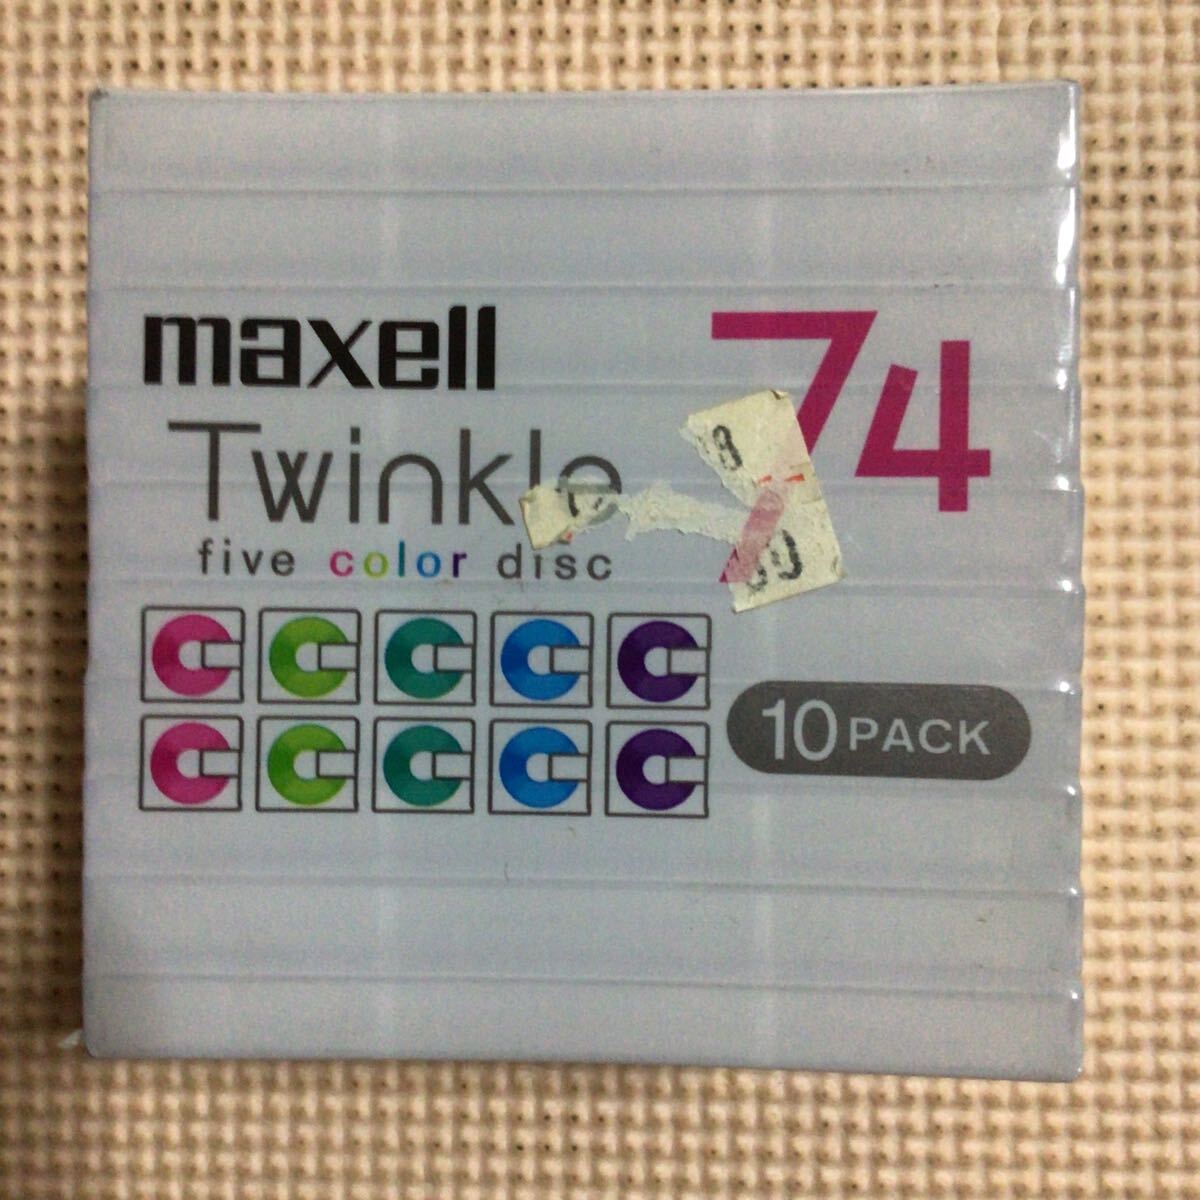 maxell TWINKLE 74 FIVE COLOR 10パック MD【mini disc】【未開封新品】★の画像4